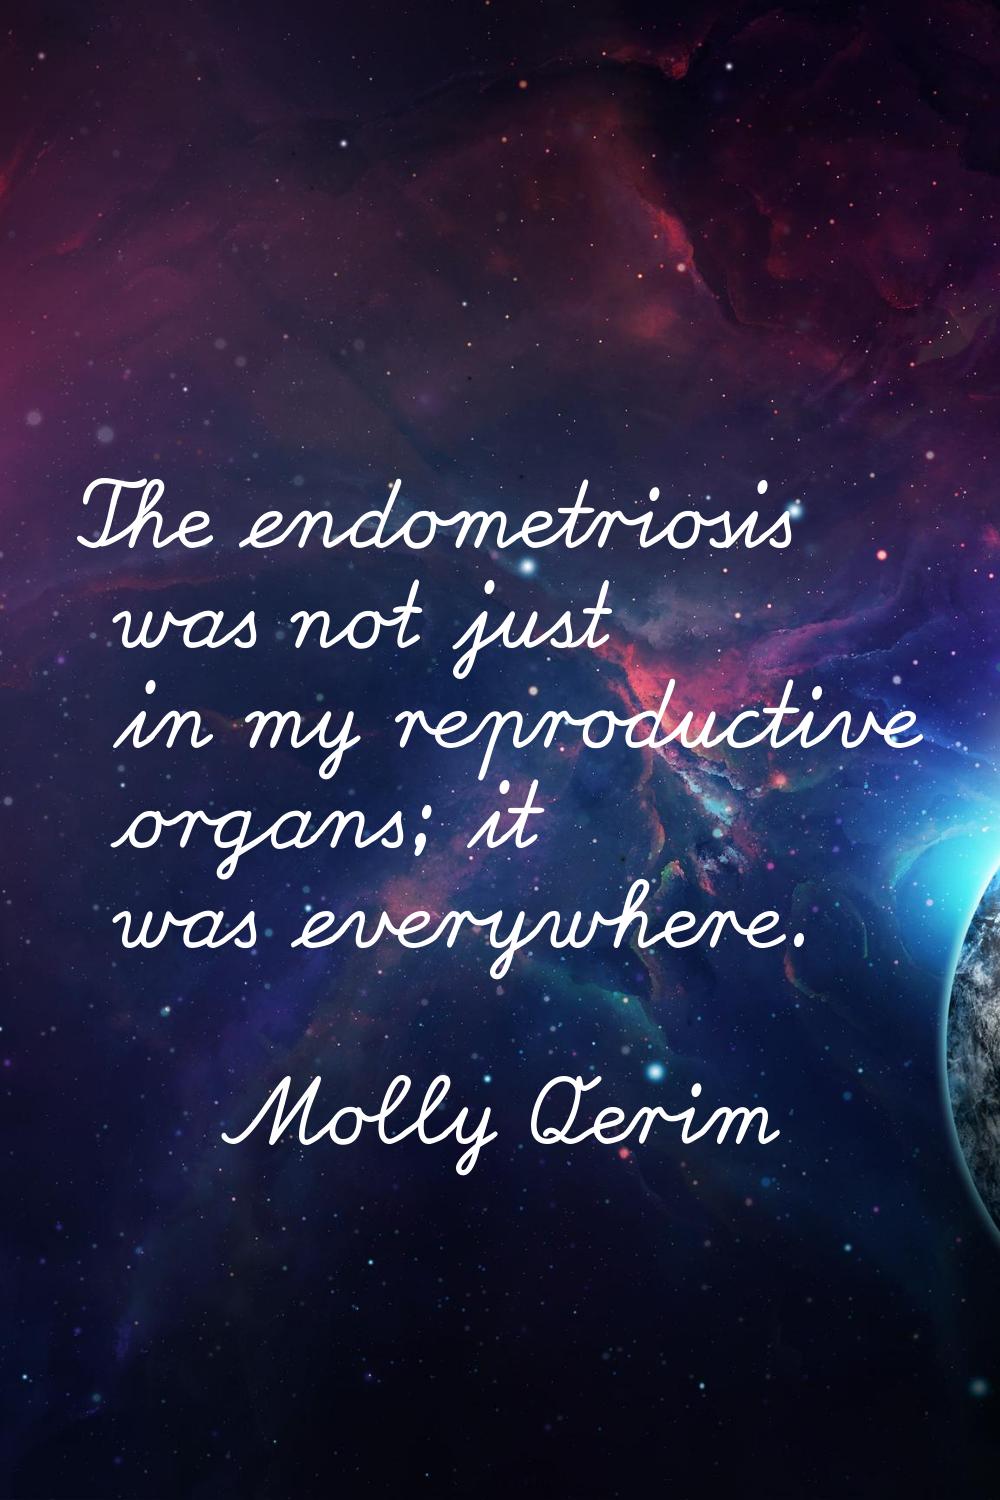 The endometriosis was not just in my reproductive organs; it was everywhere.